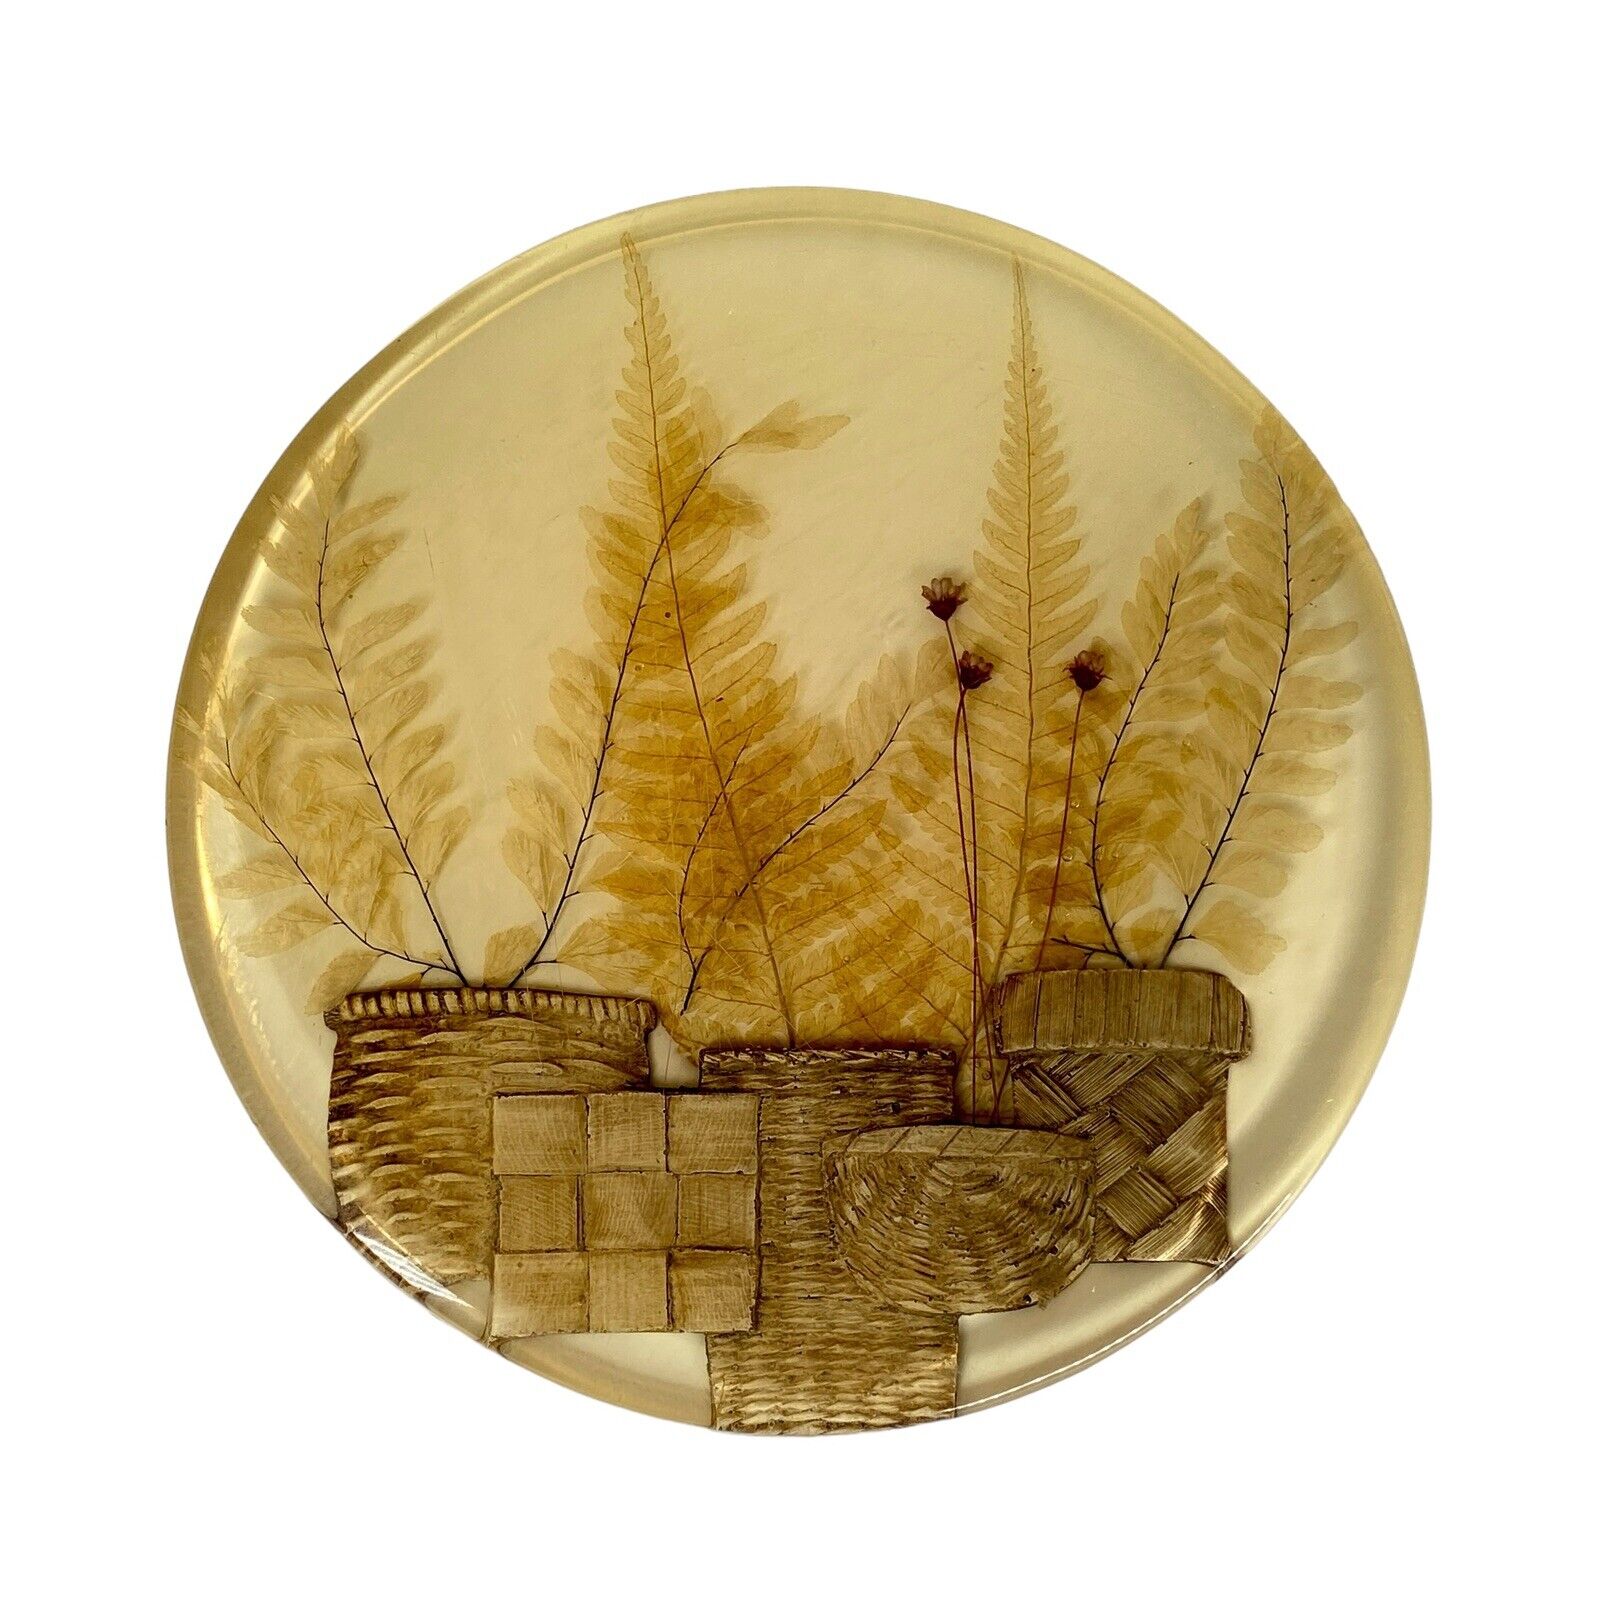 Vintage 1970's Lucite Acrylic Earthtone Trivet with Dried Ferns and Baskets